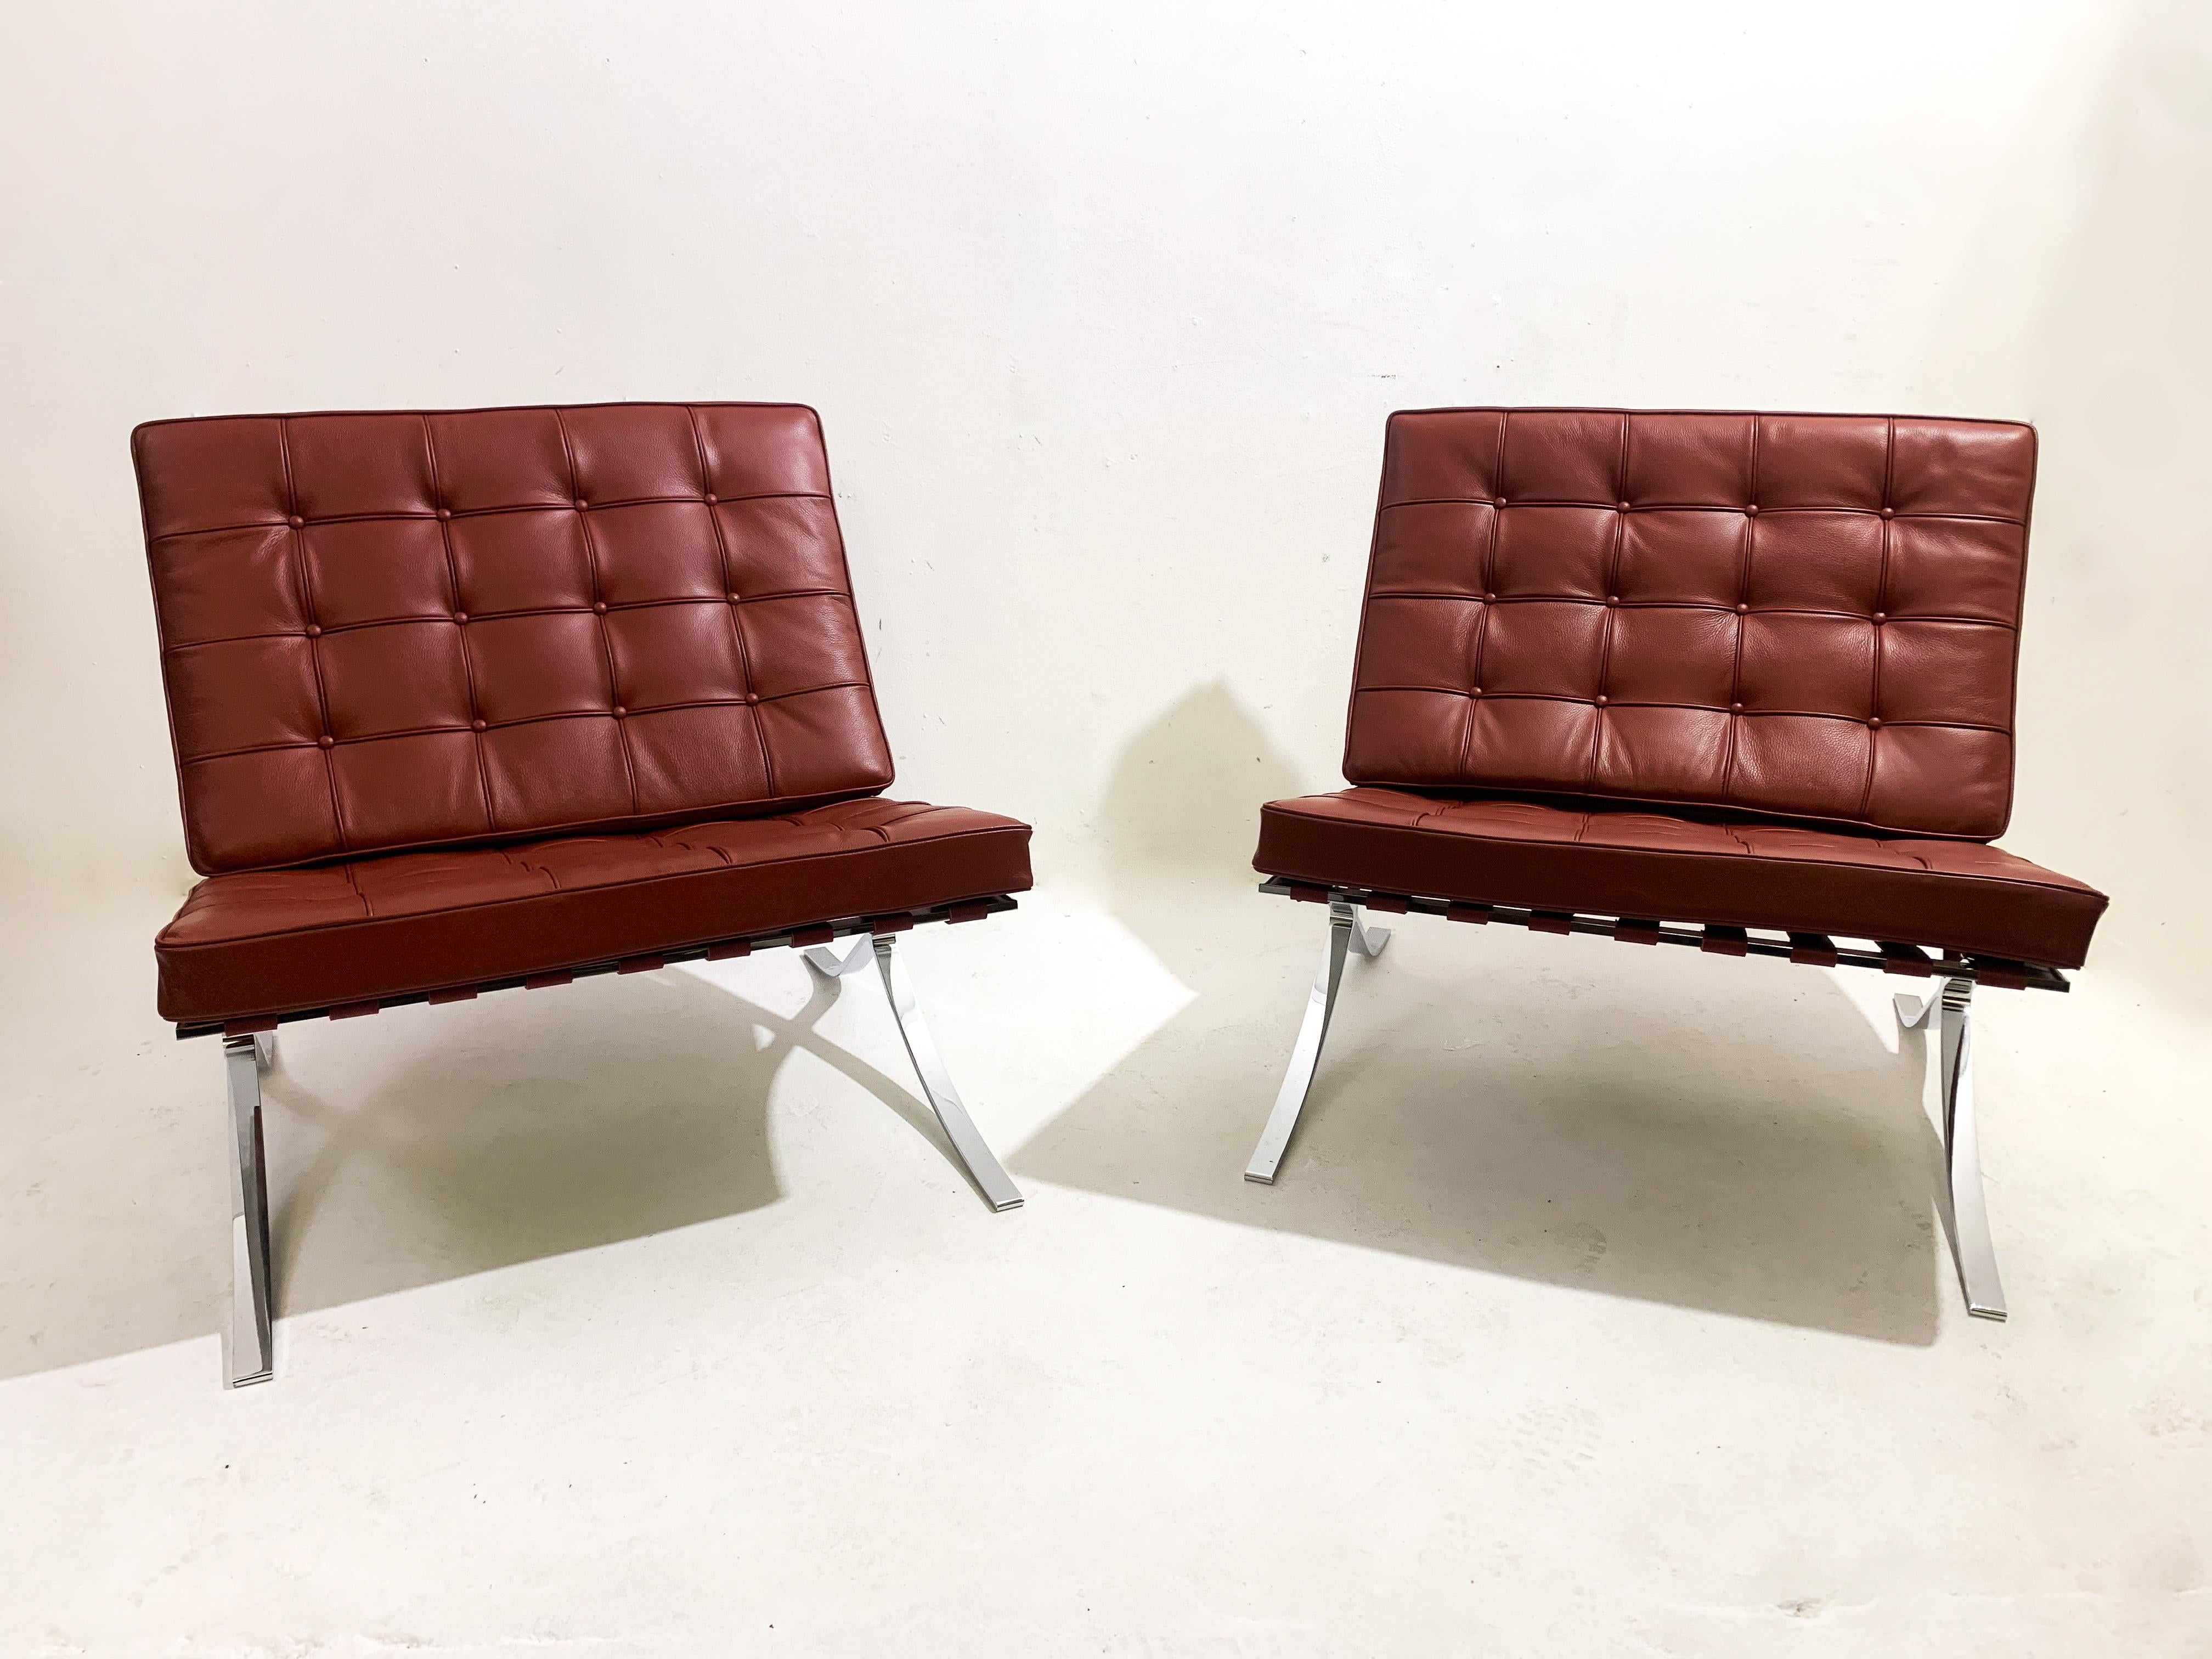 Pair of Burgundy Leather Barcelona Chairs by Mies Van Der Rohe for Knoll, 1990s For Sale 5